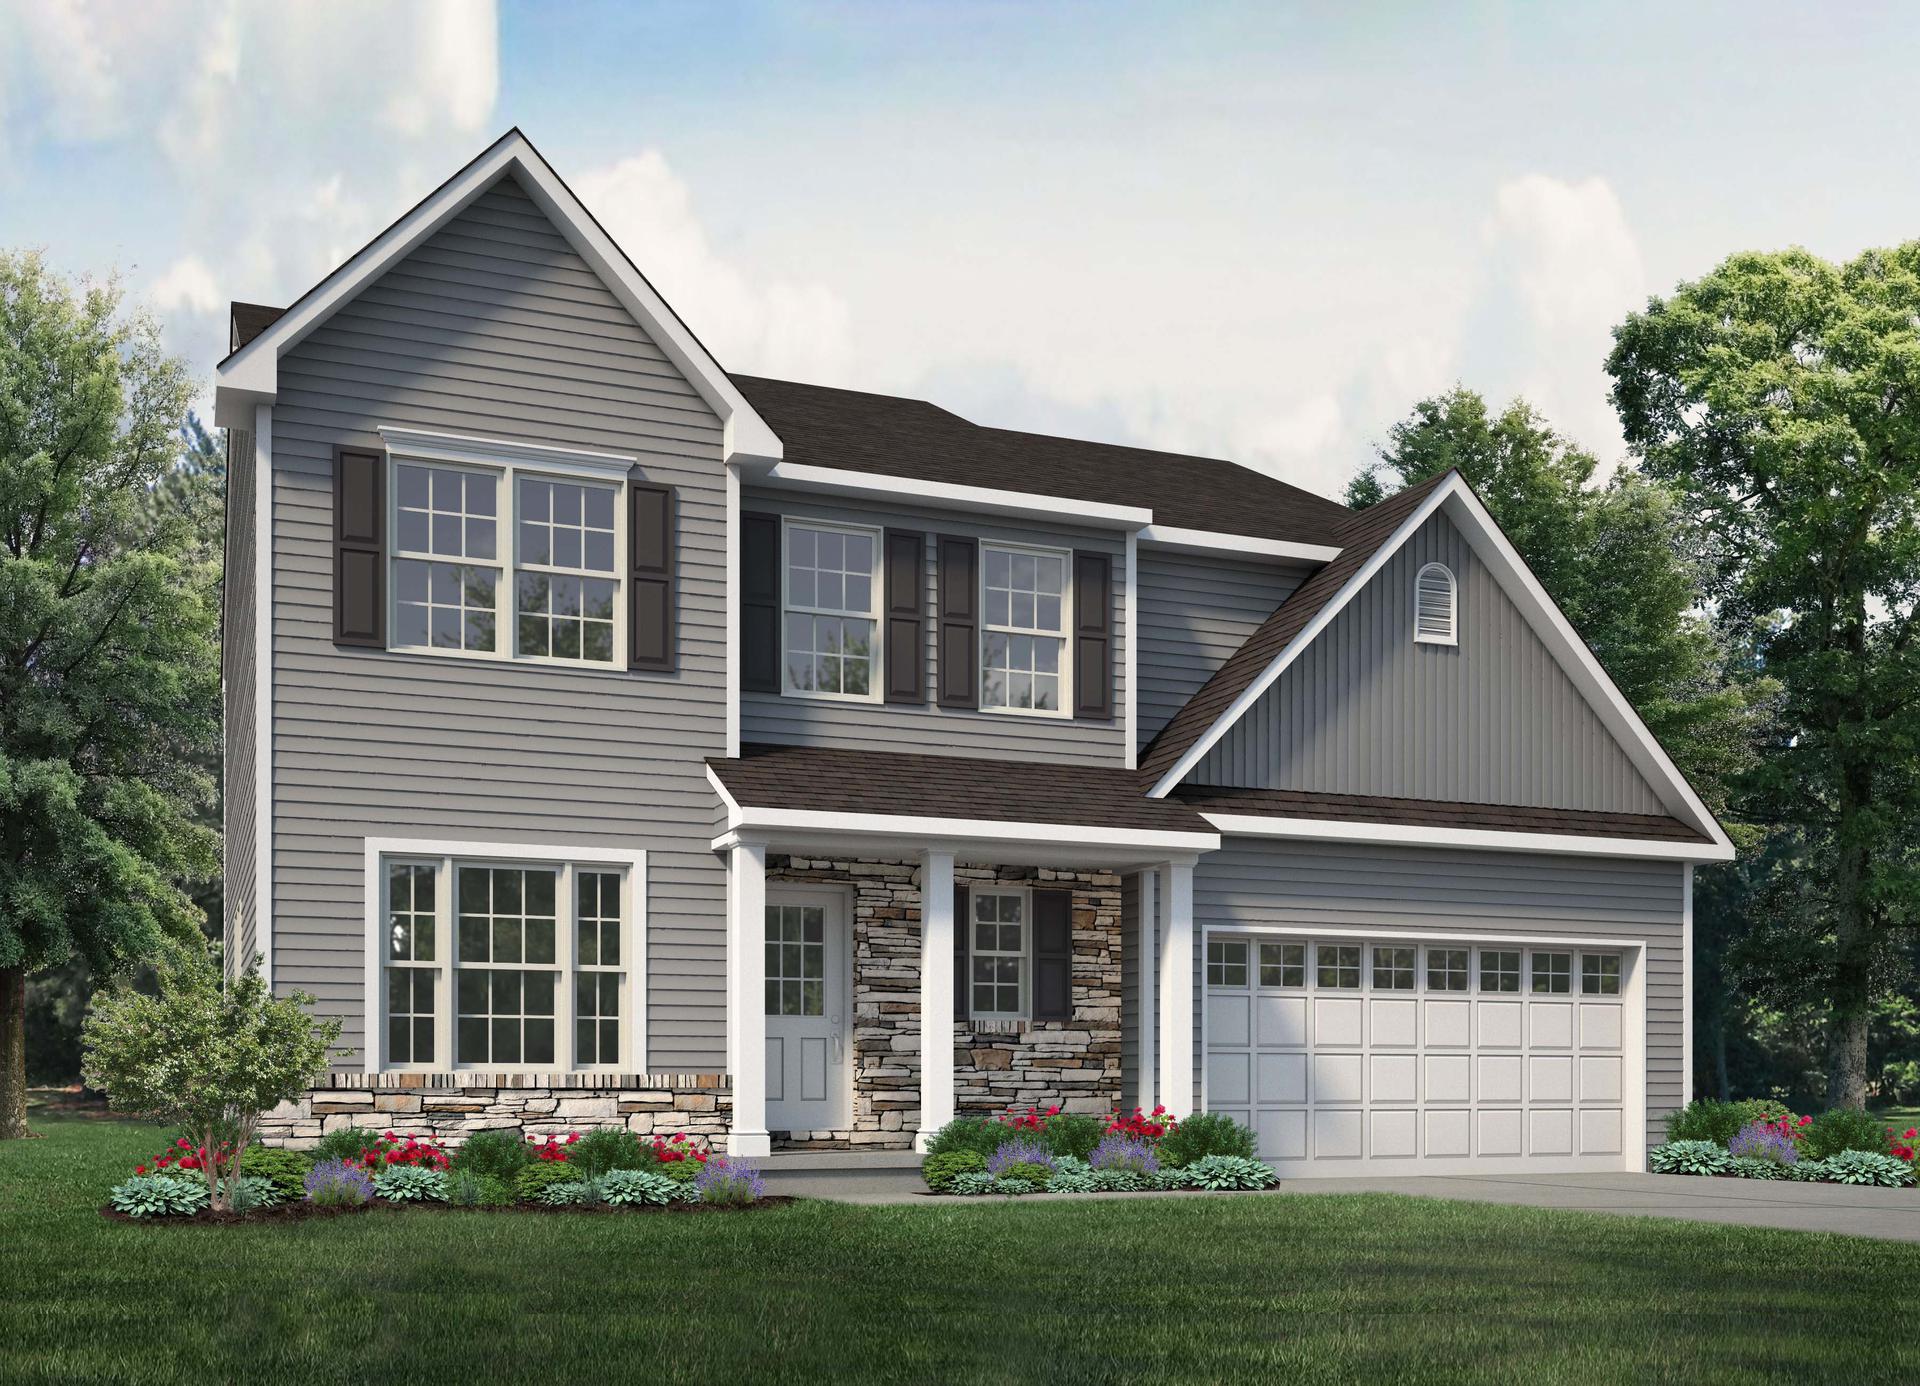 The Madison New Home in Coopersburg PA - Oxford Ridge